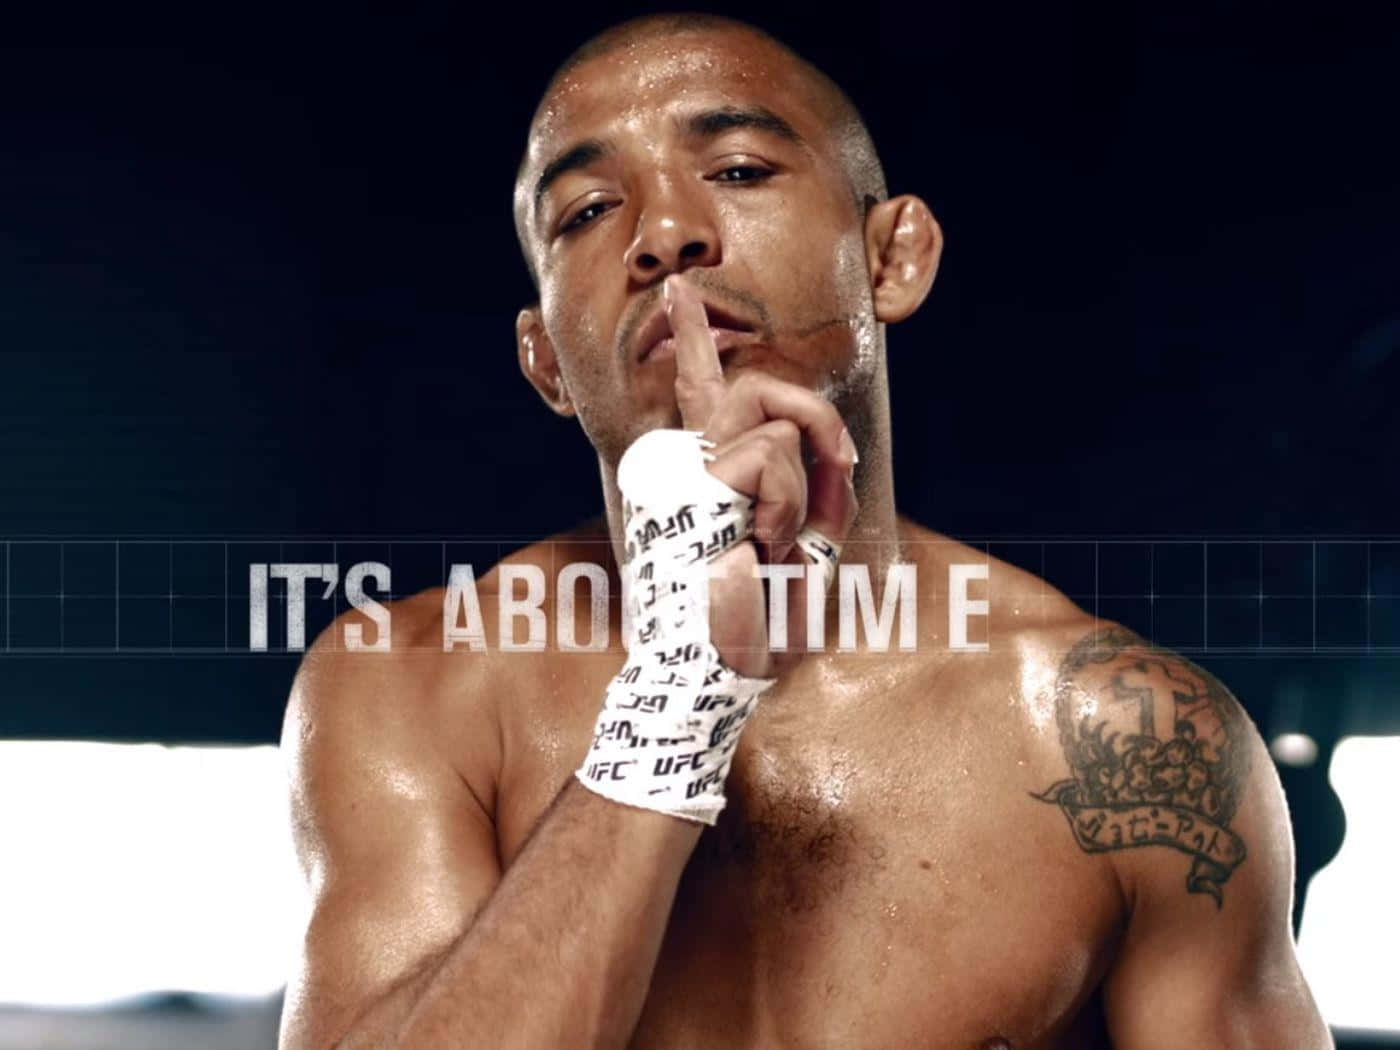 Joséaldo; Det Handlar Om Tiden. (this Would Be A Suitable Translation For A Computer Or Mobile Wallpaper Featuring The Brazilian Mixed Martial Artist José Aldo With The Text 